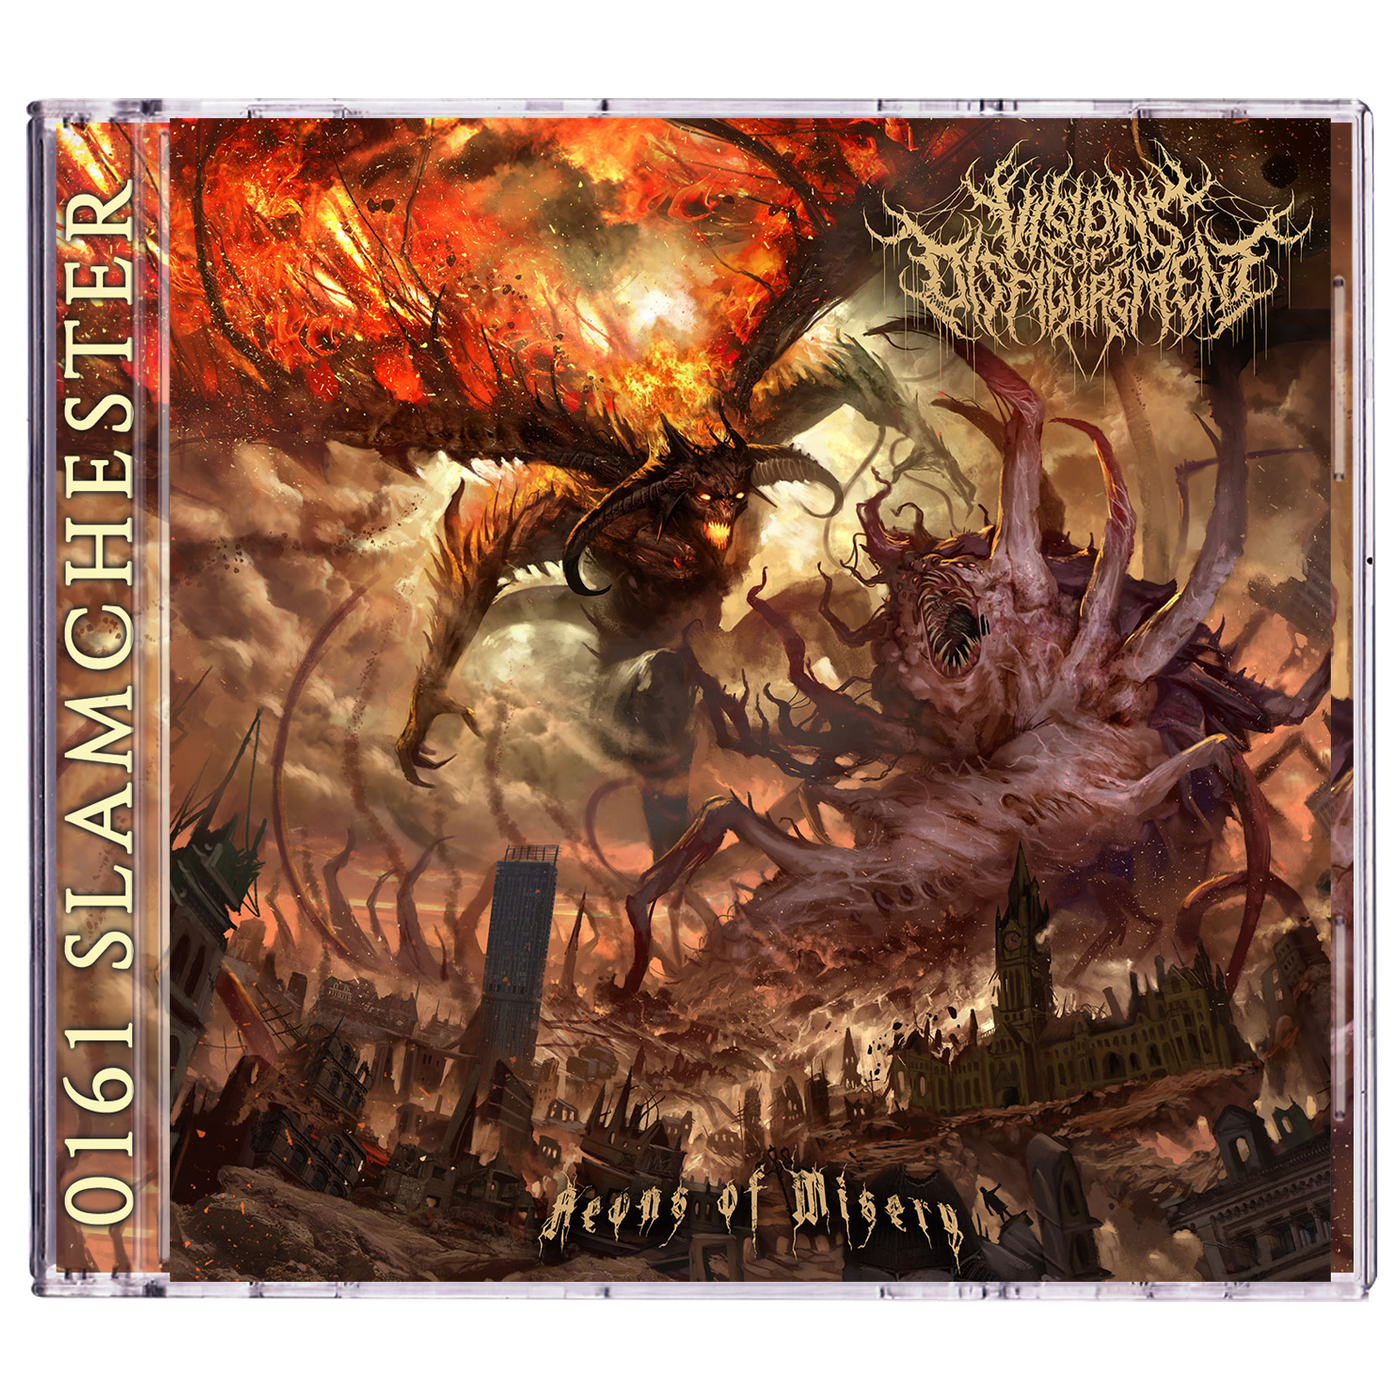 Visions Of Disfigurement ‘Aeons of Misery’ CD